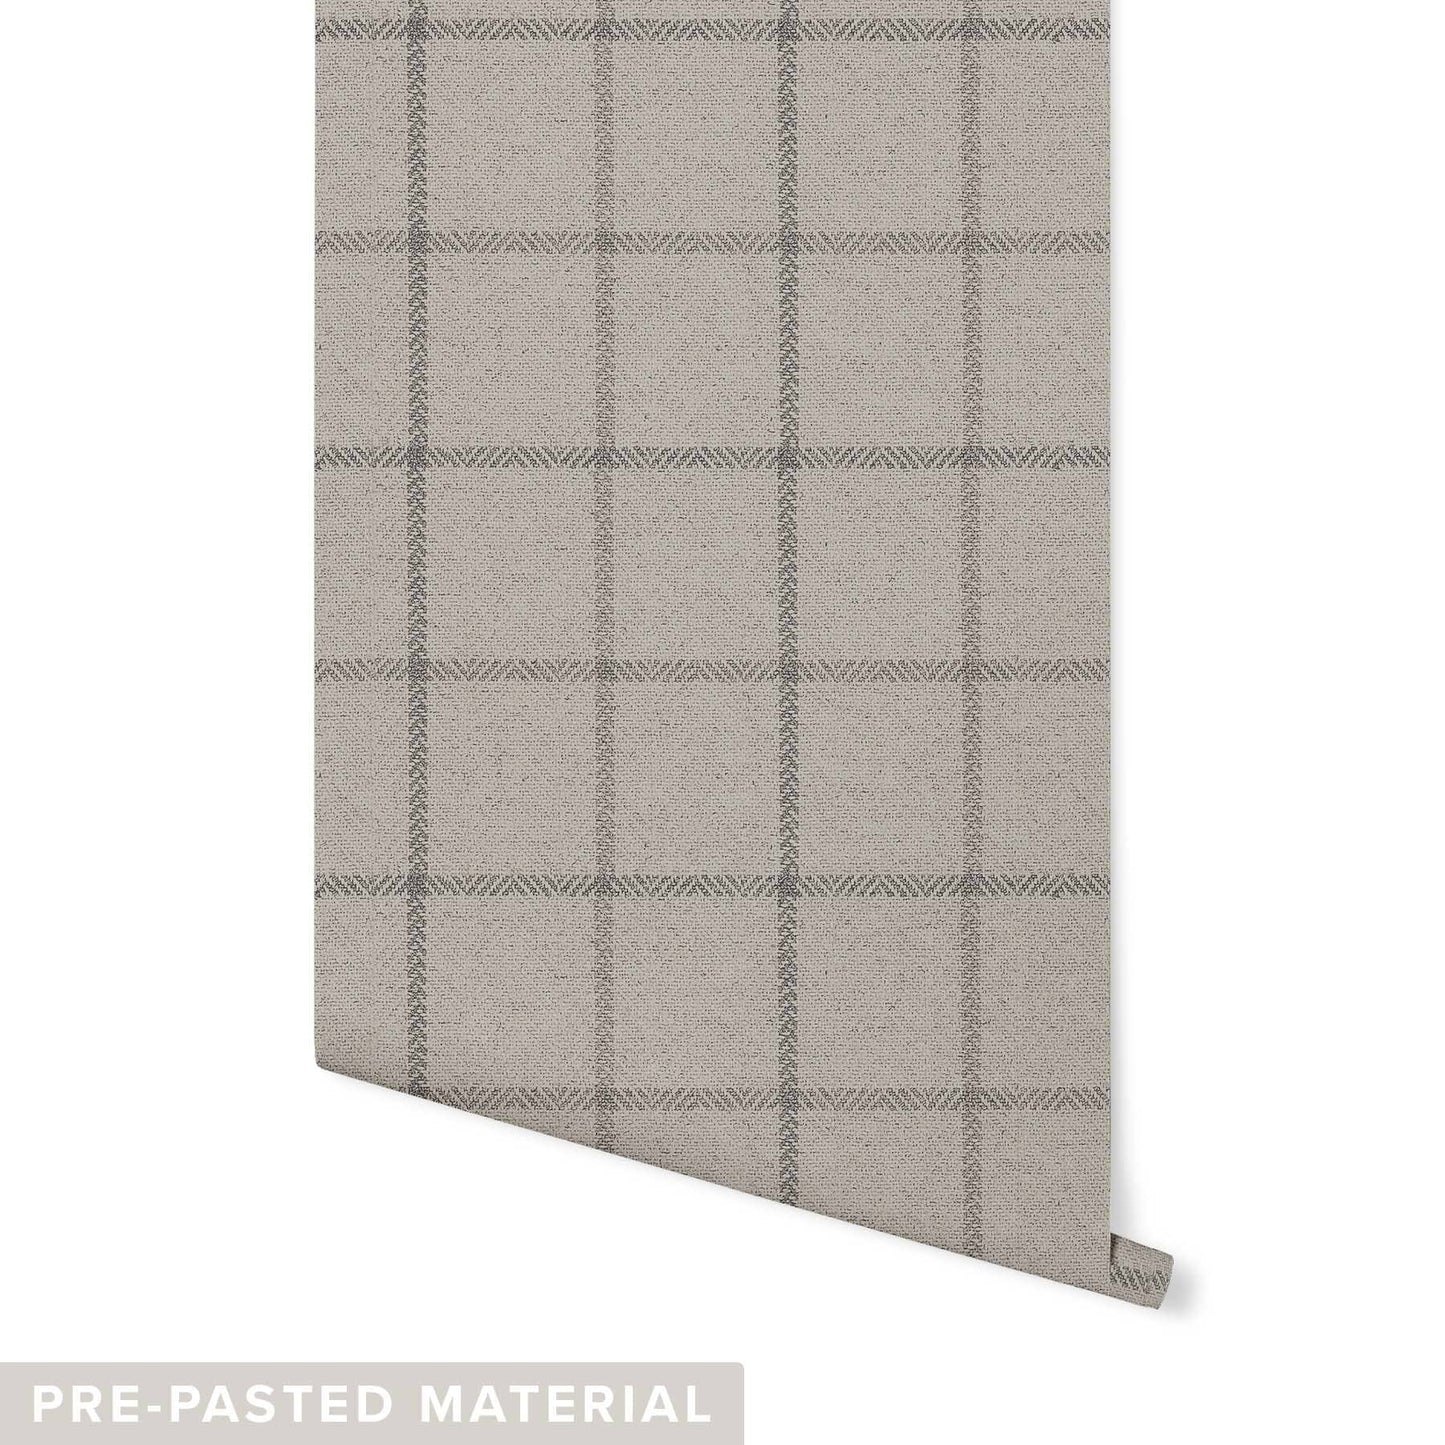 Country Plaid Wallpaper Wallpaper Mia Parres Pre-pasted Maple Leaf Brown DOUBLE ROLL : 46" X 4 FEET